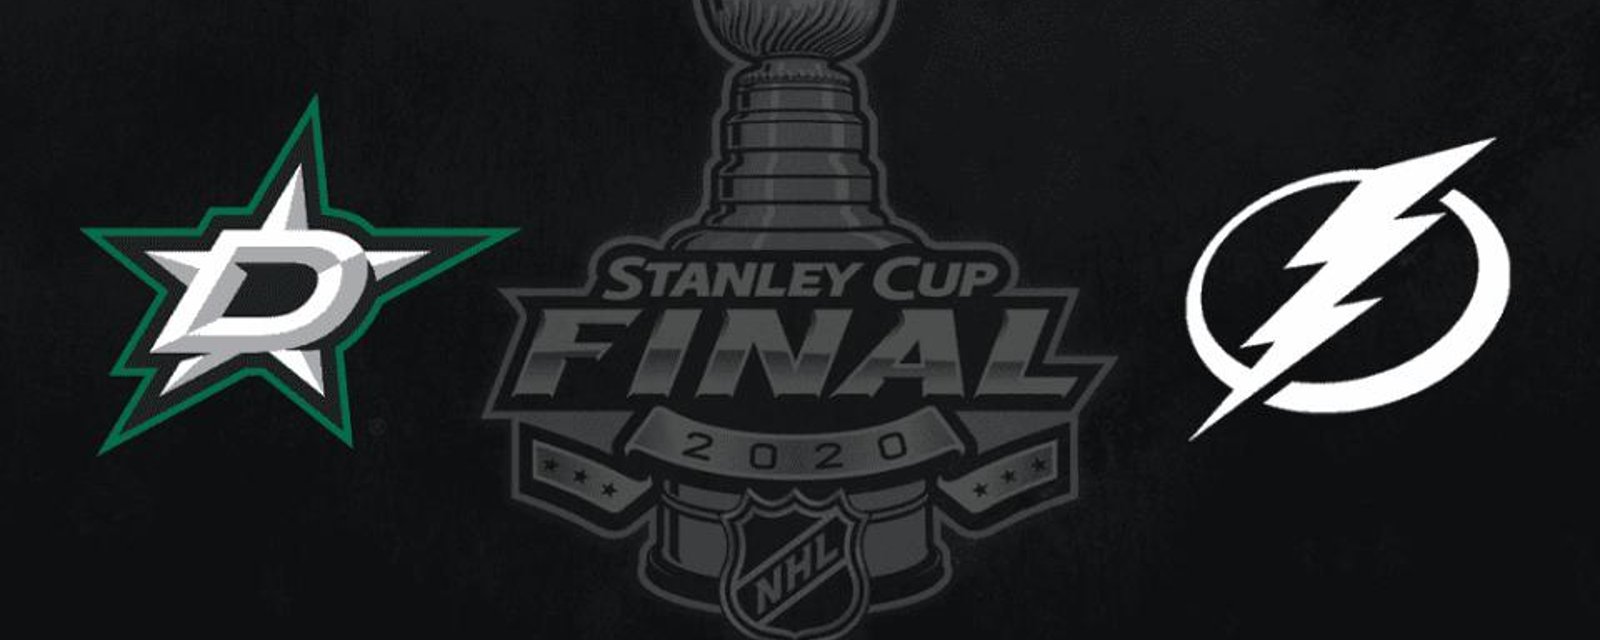 Here’s your official Stanley Cup final schedule! 